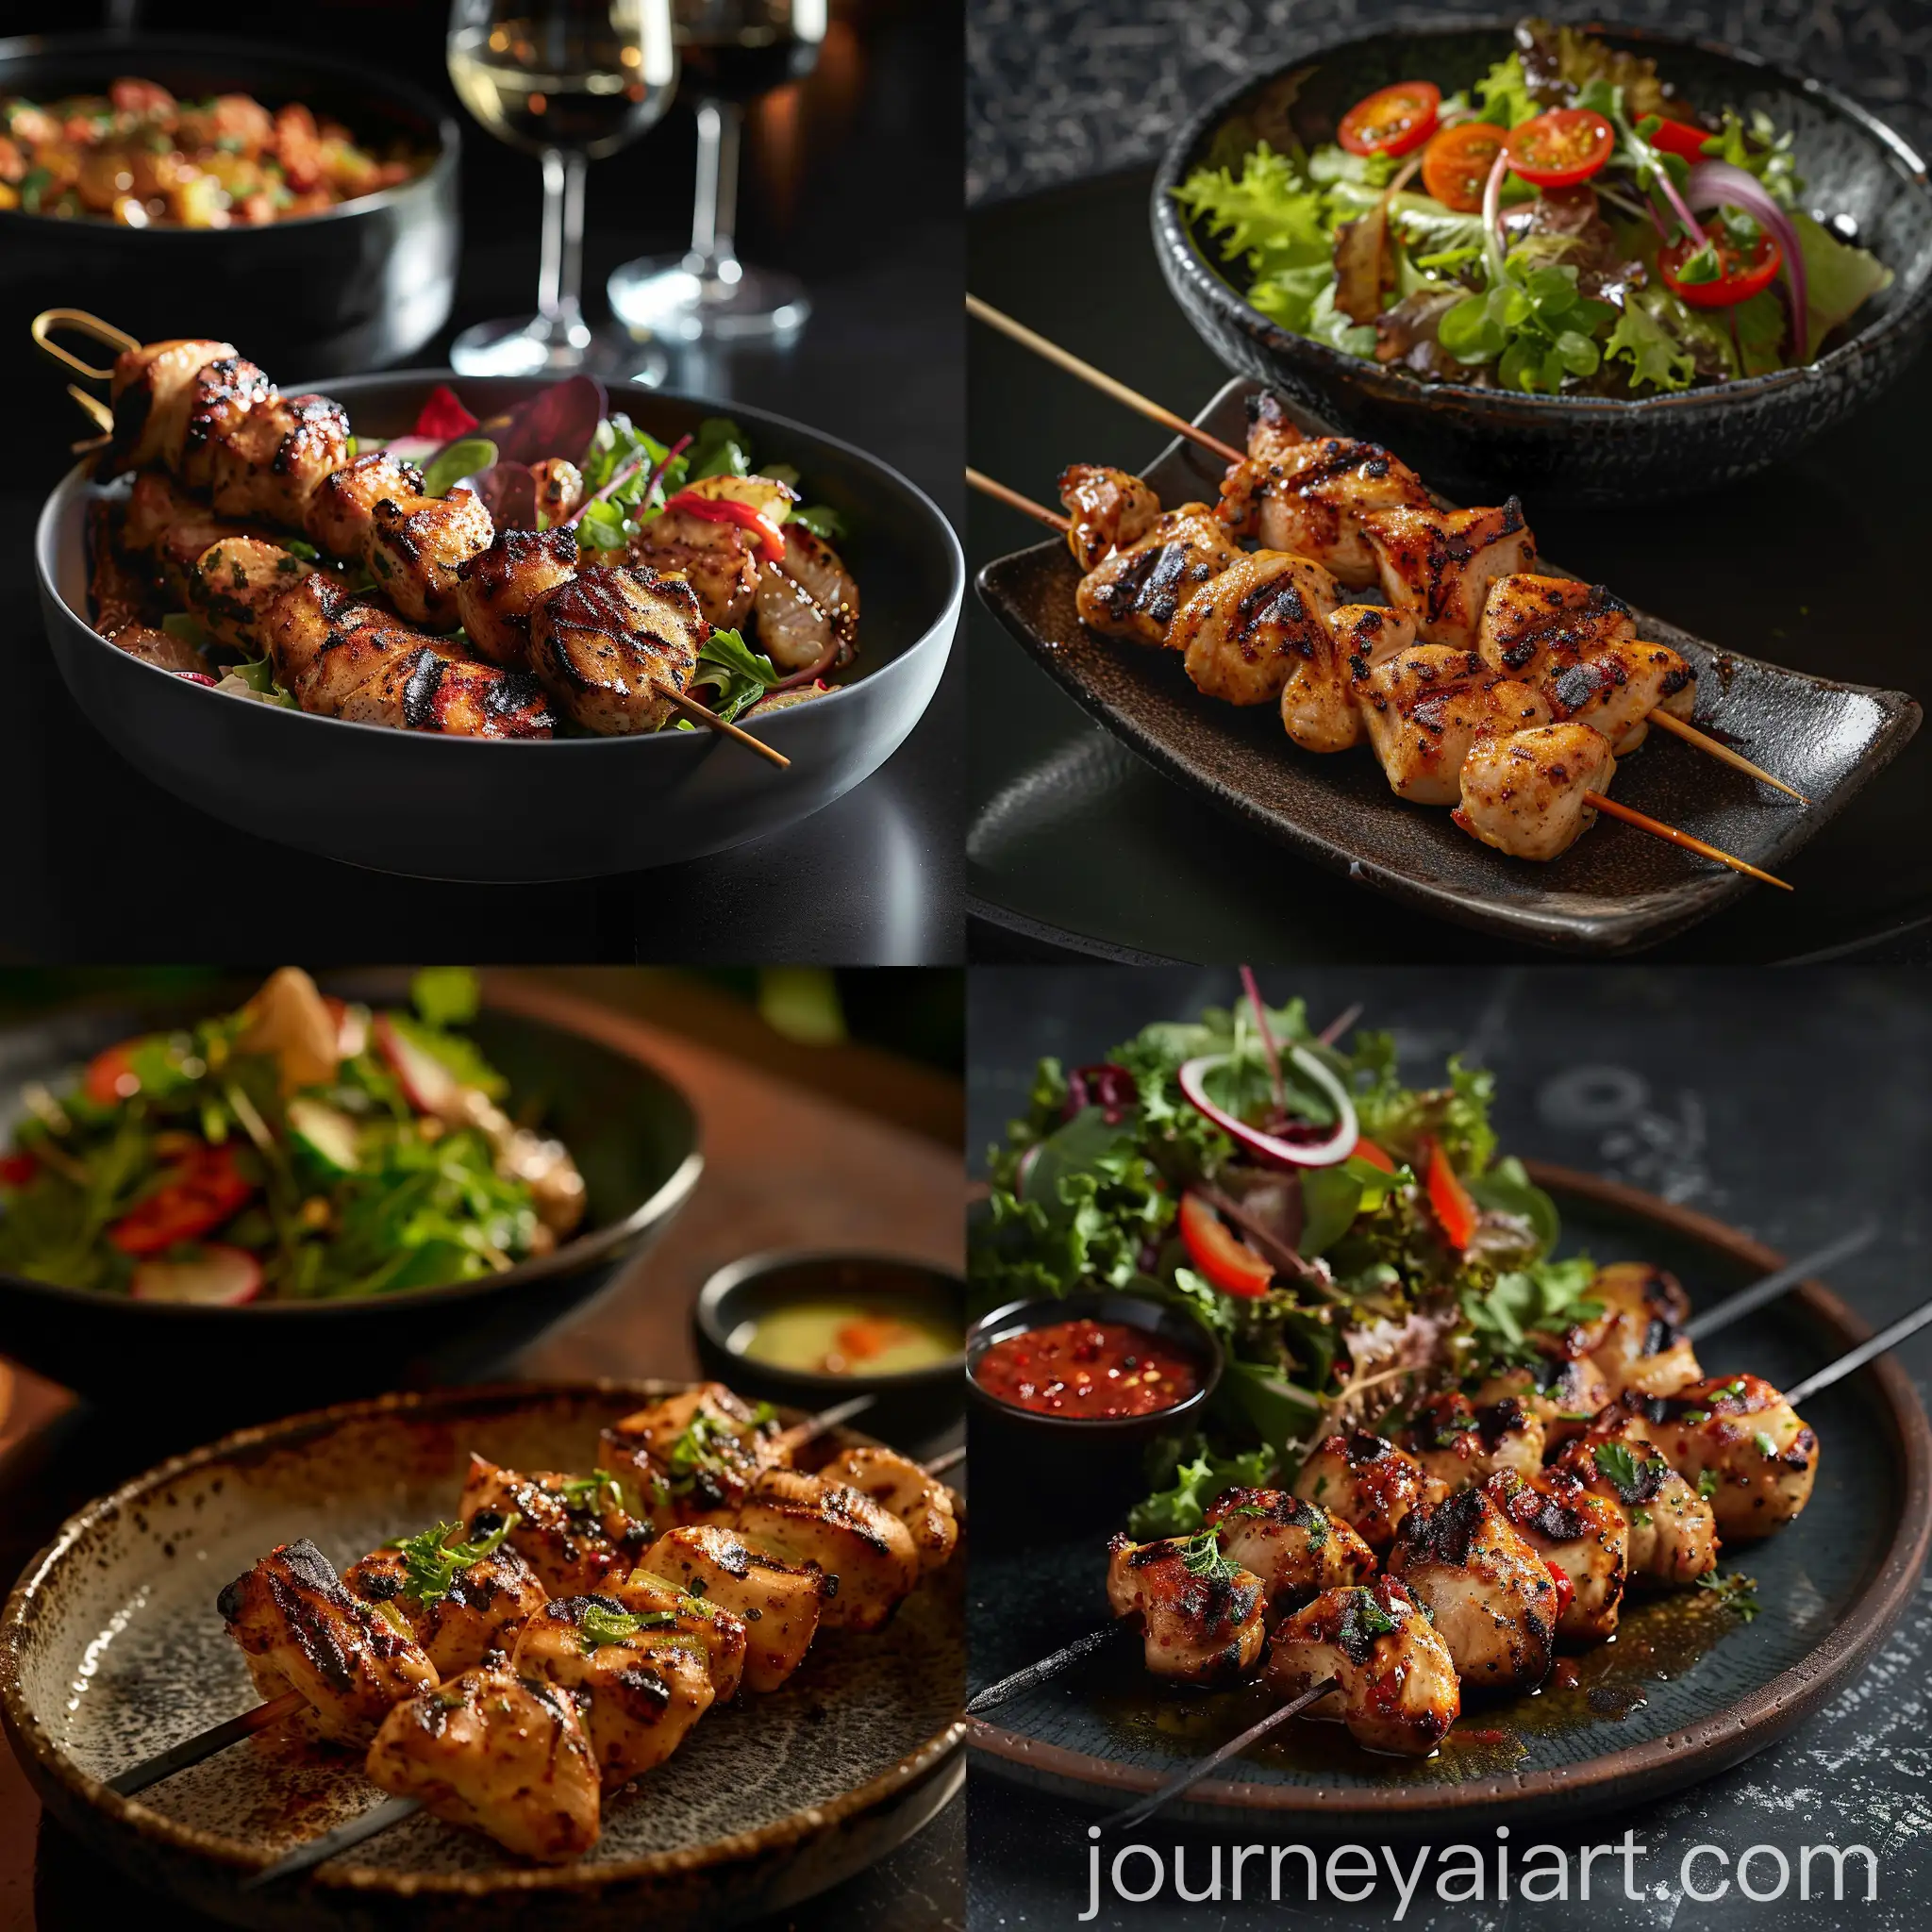 Luxurious-Chicken-Skewer-and-Roasted-Chicken-with-Salad